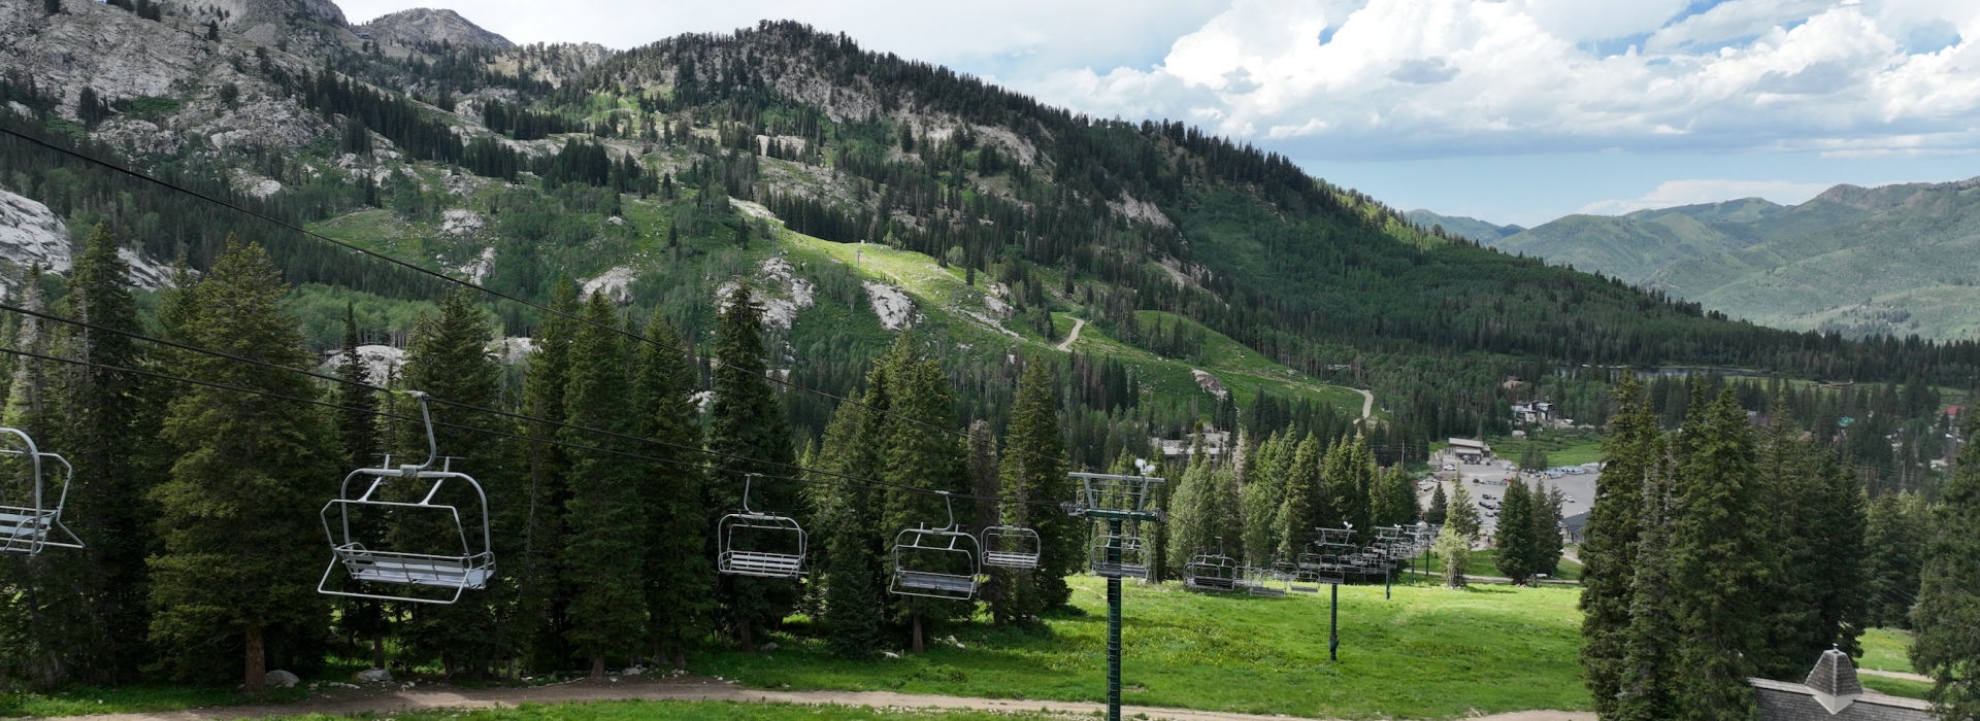 Scenic drone shot of Brighton Resort in Big Cottonwood Canyon in the Summer 